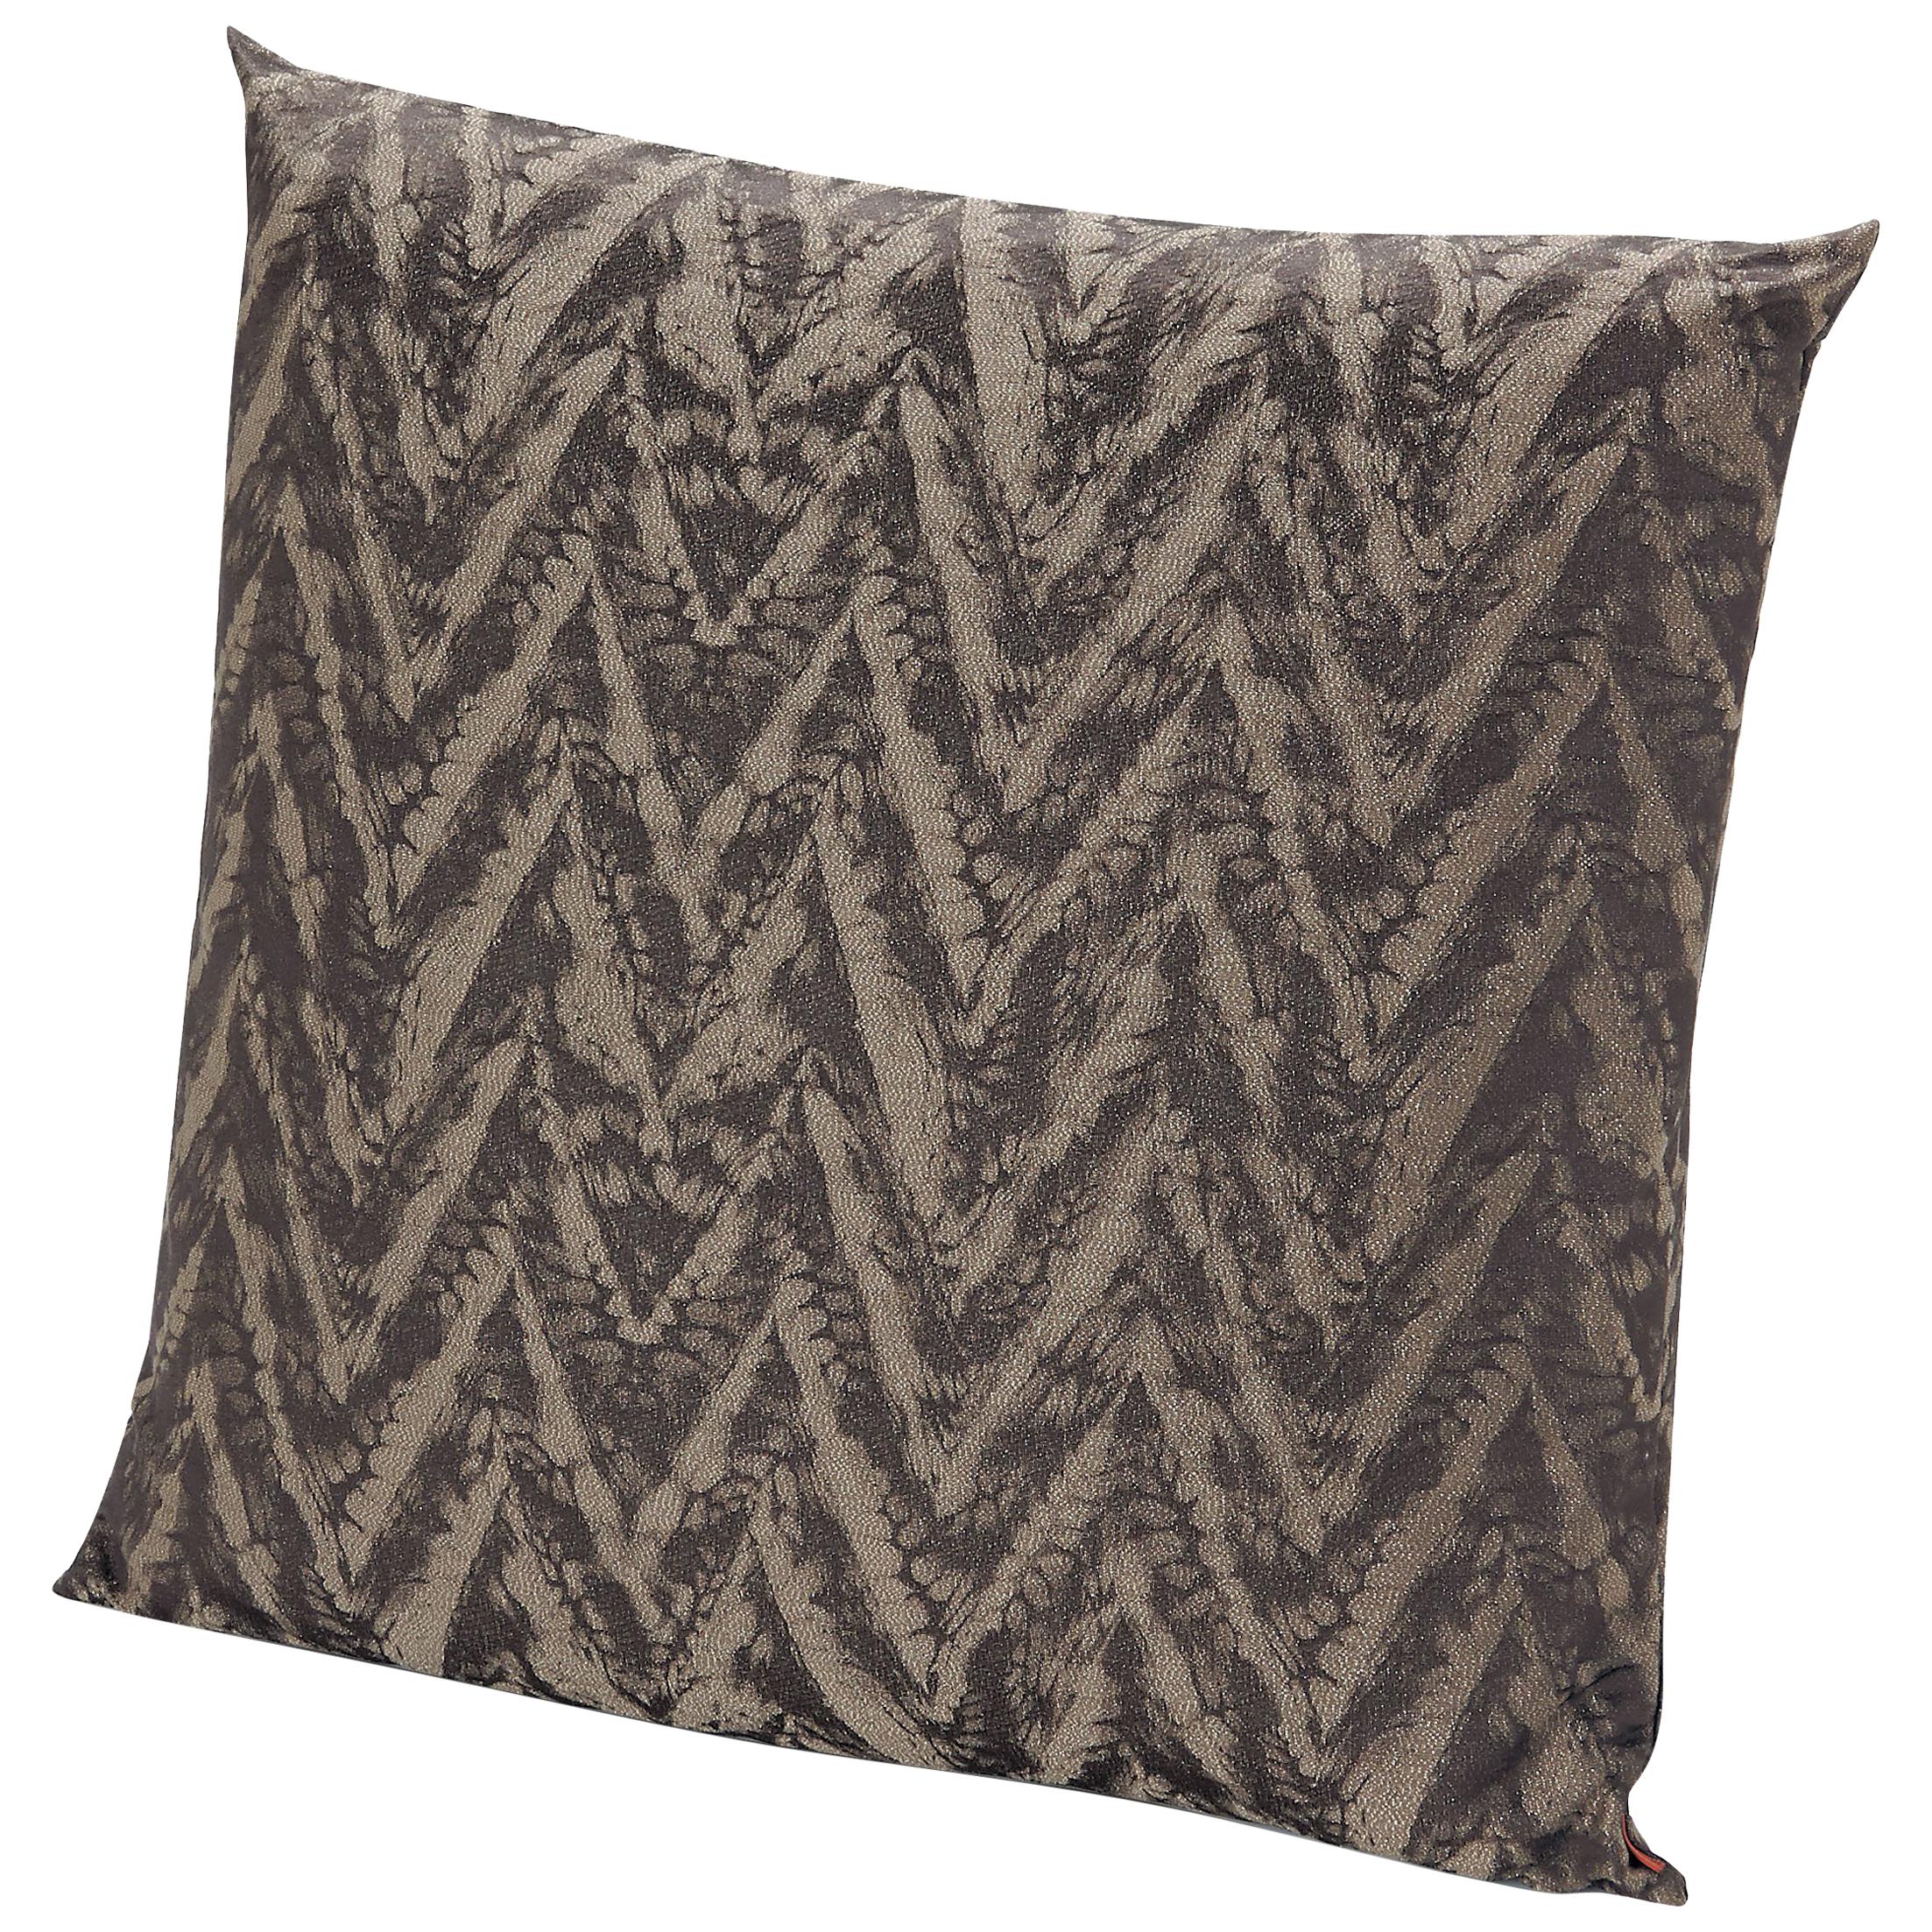 Missoni Home Reunion Cushion in Brown and Beige with Chevron Print For Sale